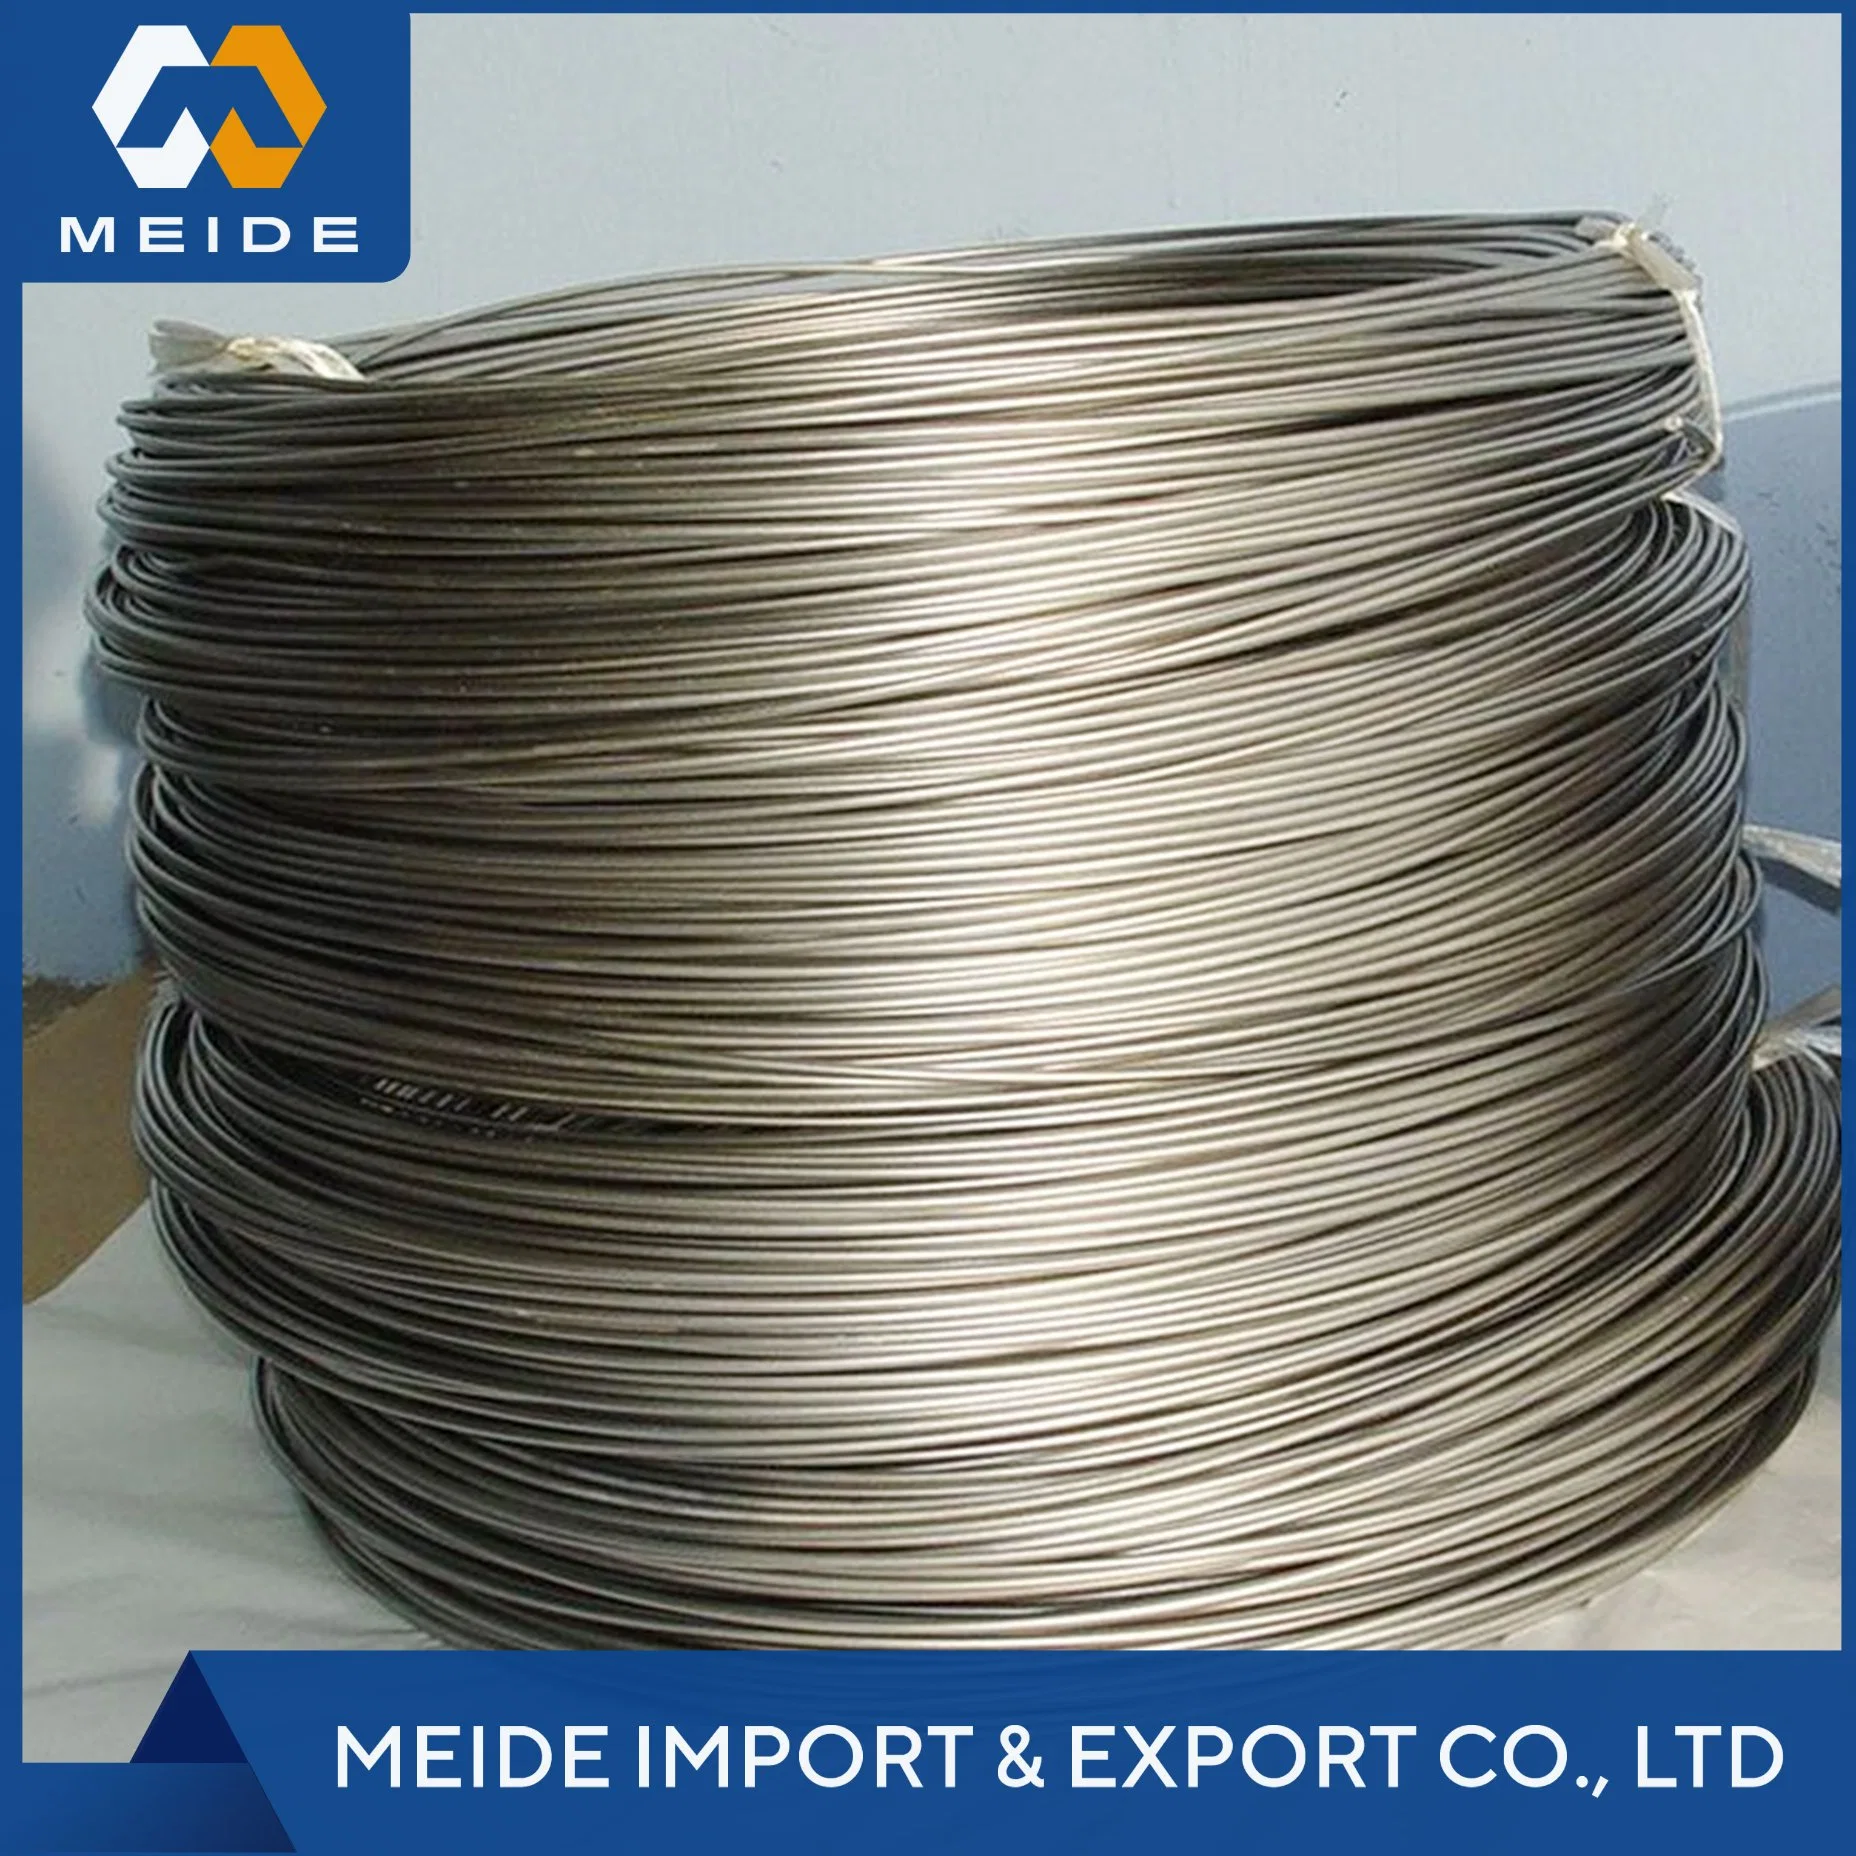 Titanium Material 0.1 mm-8.0 mm 99.9% High-Purity Titanium Wire/Welding Wire Industrial/Medical Ultra-Fine Coil Wire